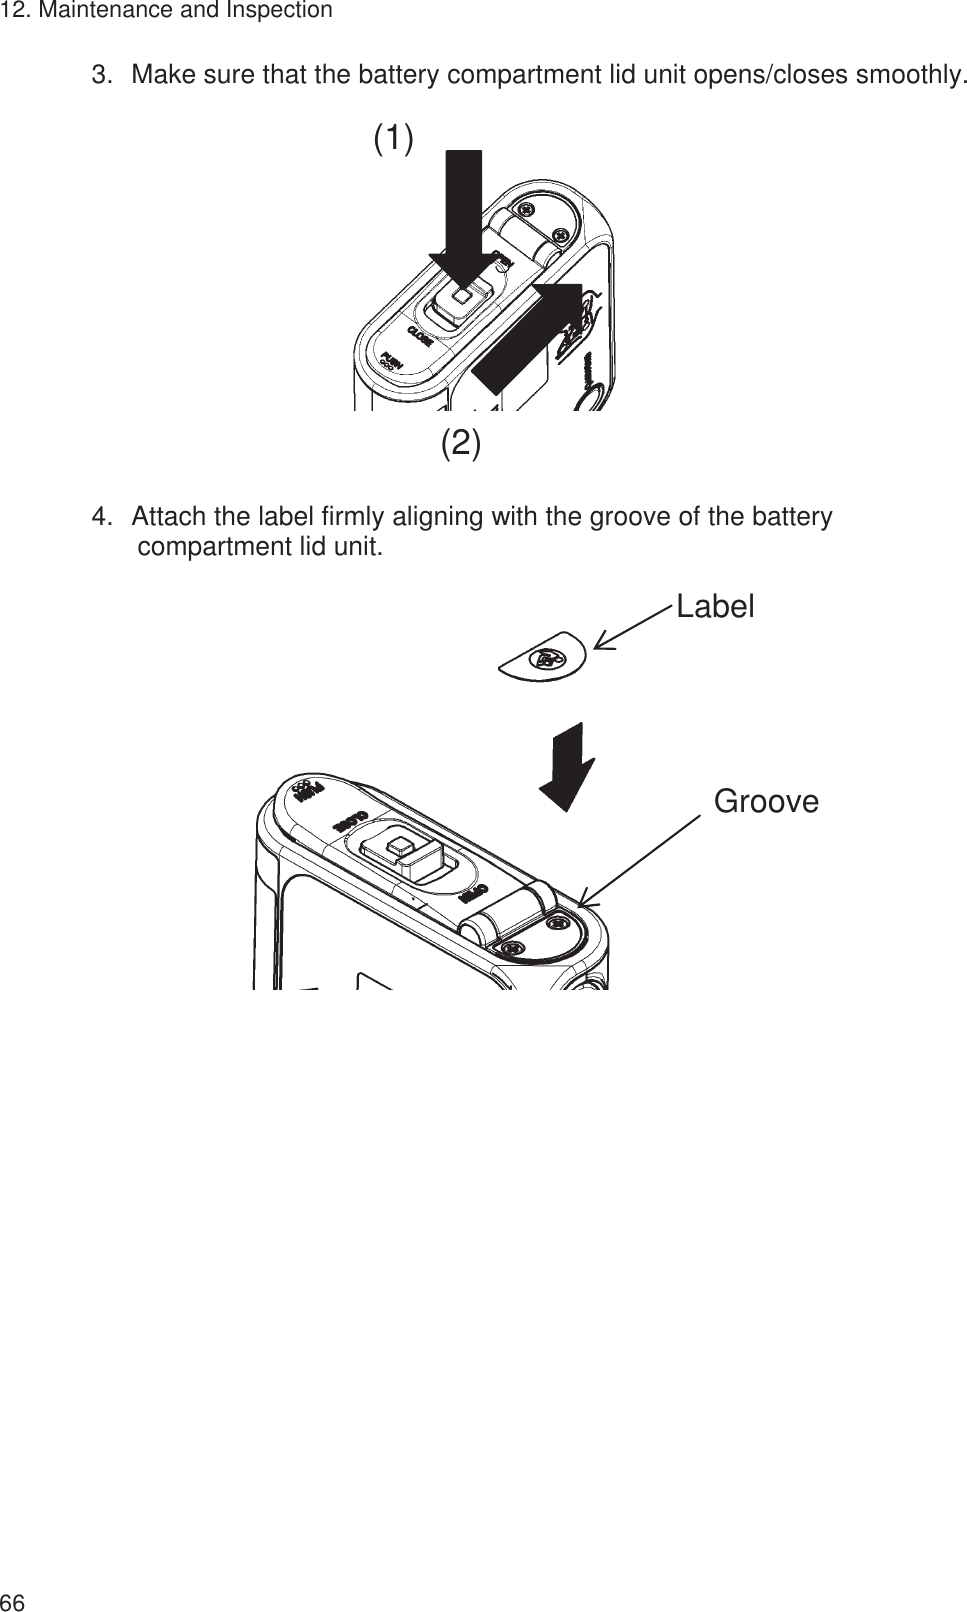 12. Maintenance and Inspection 66 3.㻌Make sure that the battery compartment lid unit opens/closes smoothly.              4.㻌Attach the label firmly aligning with the groove of the battery compartment lid unit.            (1) (2) Groove Label 